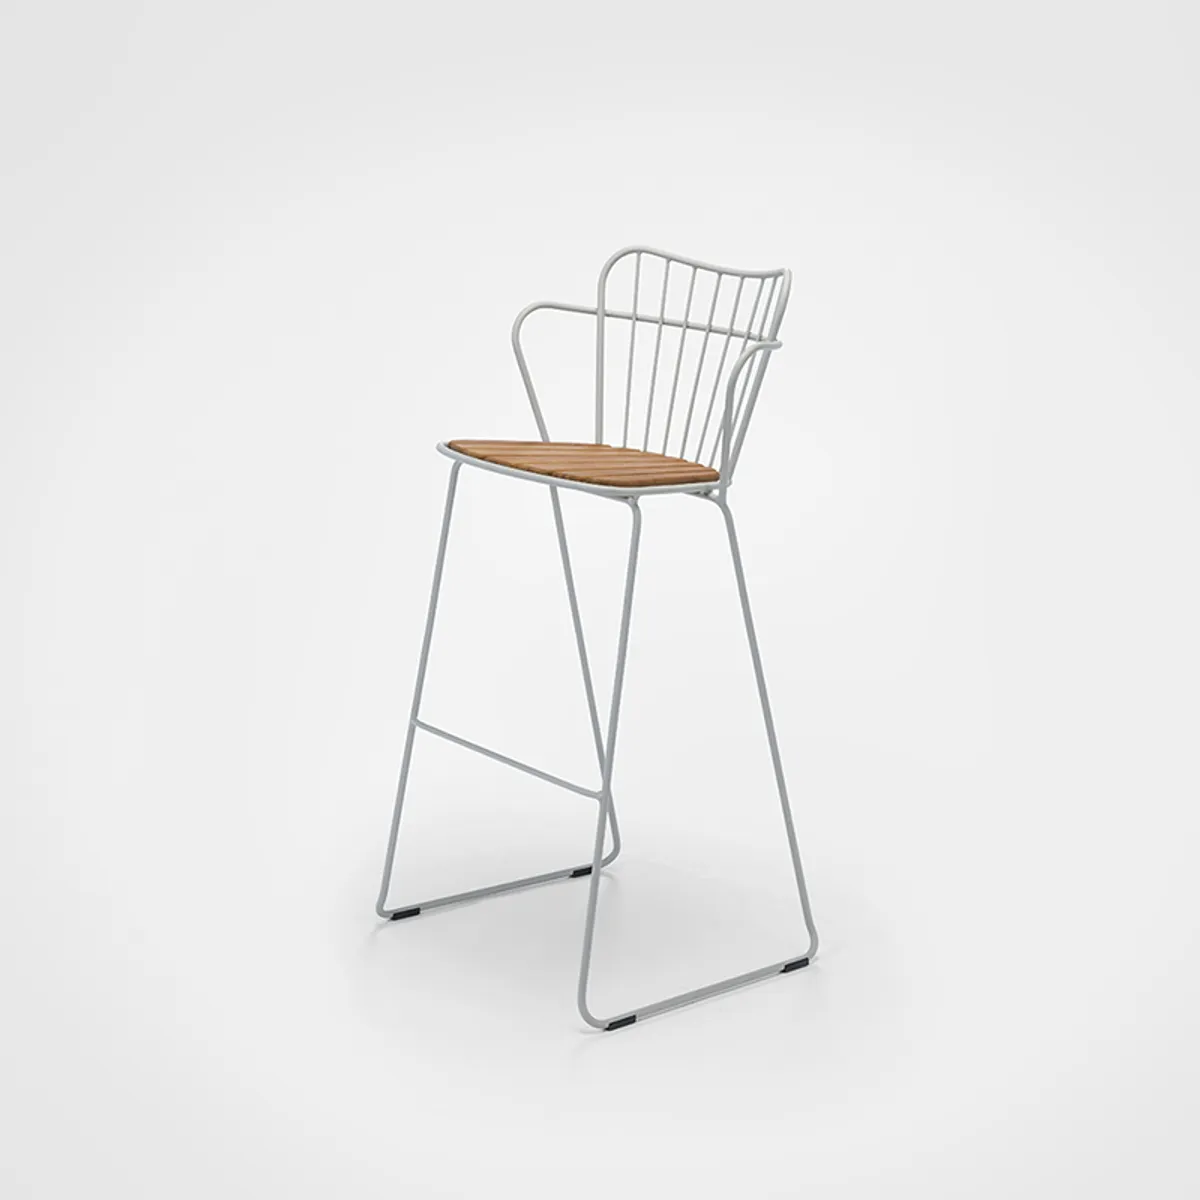 Plumage Bar Stool In White Metal With Bamboo Seat Outdoor Furniture For Bars